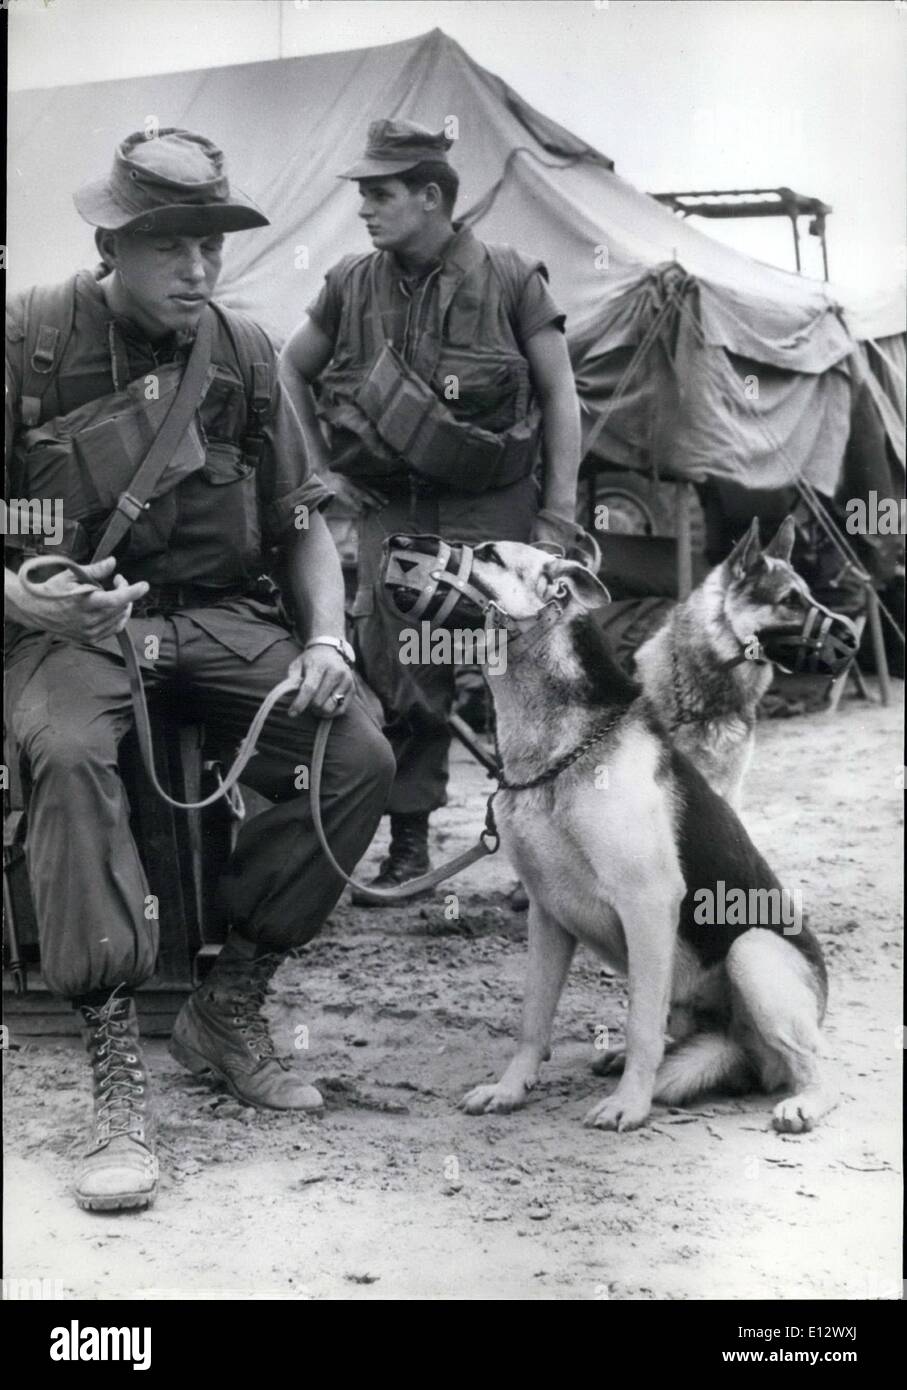 Feb. 25, 2012 - Scout dogs in Vietnam: U.S. Special Landing Force ''Bravo'' received additional help during their operation south of Da Nang from two scout dogs ''Bruno'' and ''Arko'' shown with their Marine handlers. They are used to flush Viet Cong guerillas from jungle country. Stock Photo